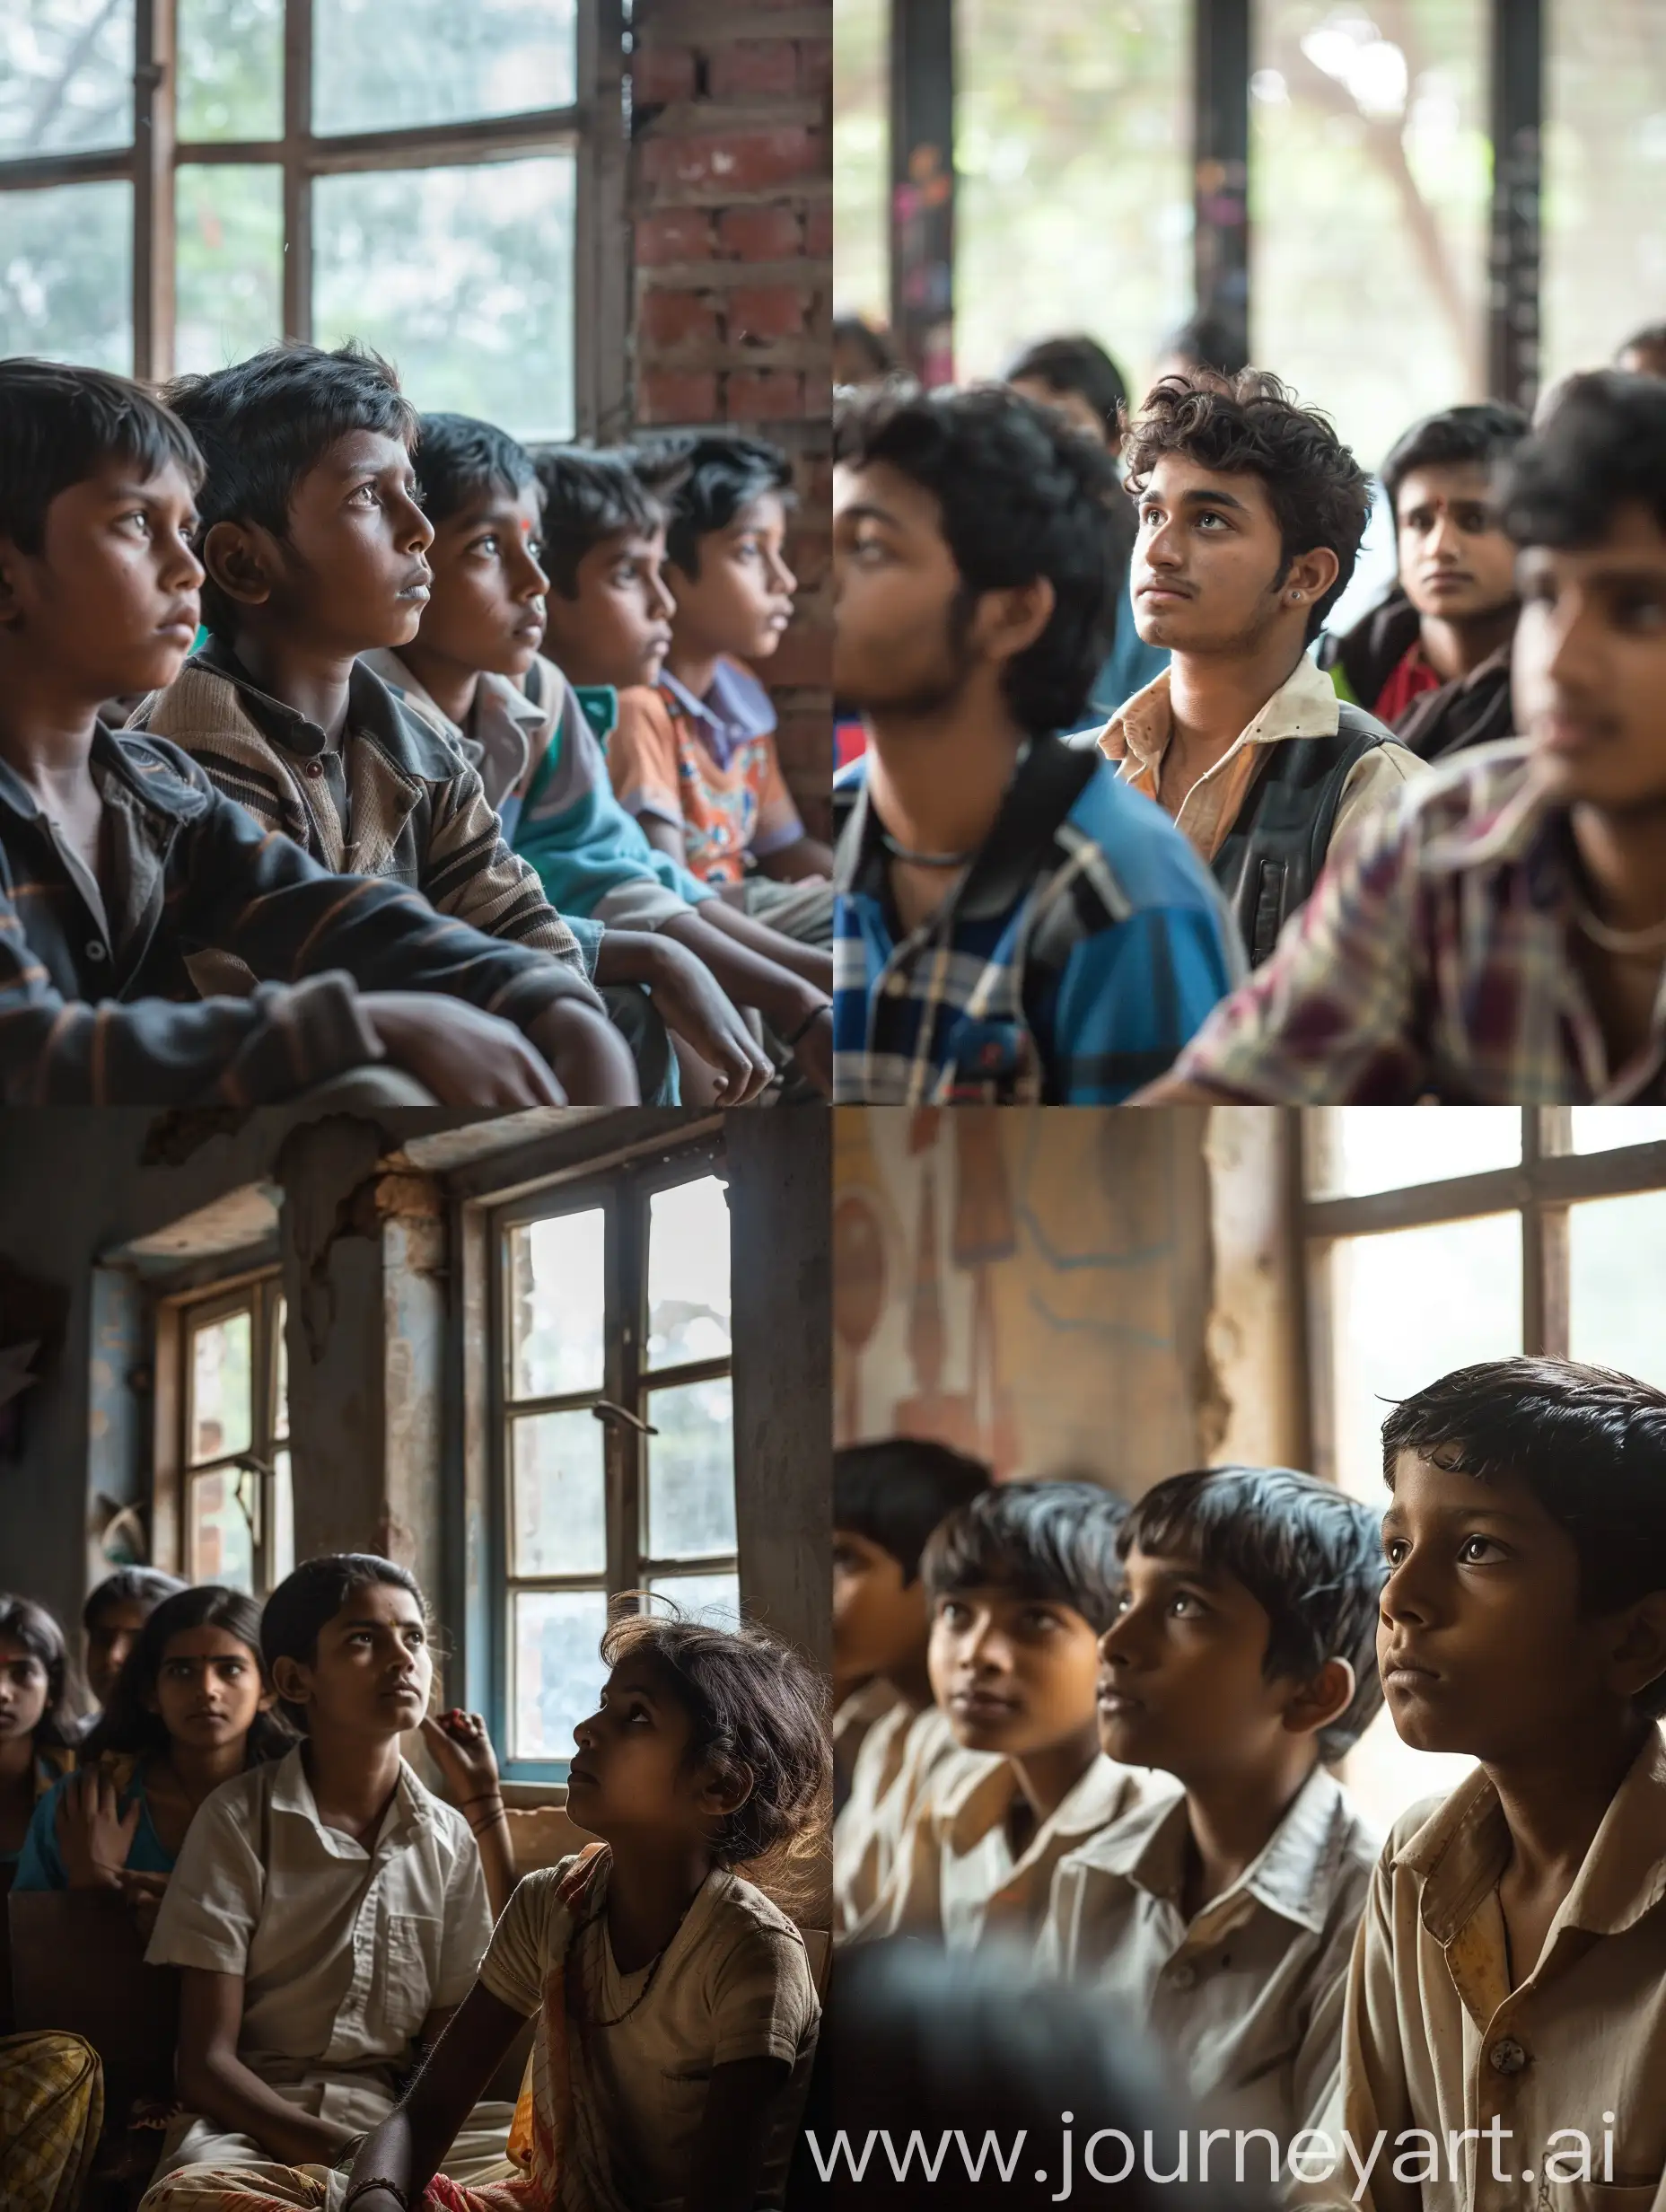 A group of indian students sitting in a classroom, some looking focused, others looking out the window.